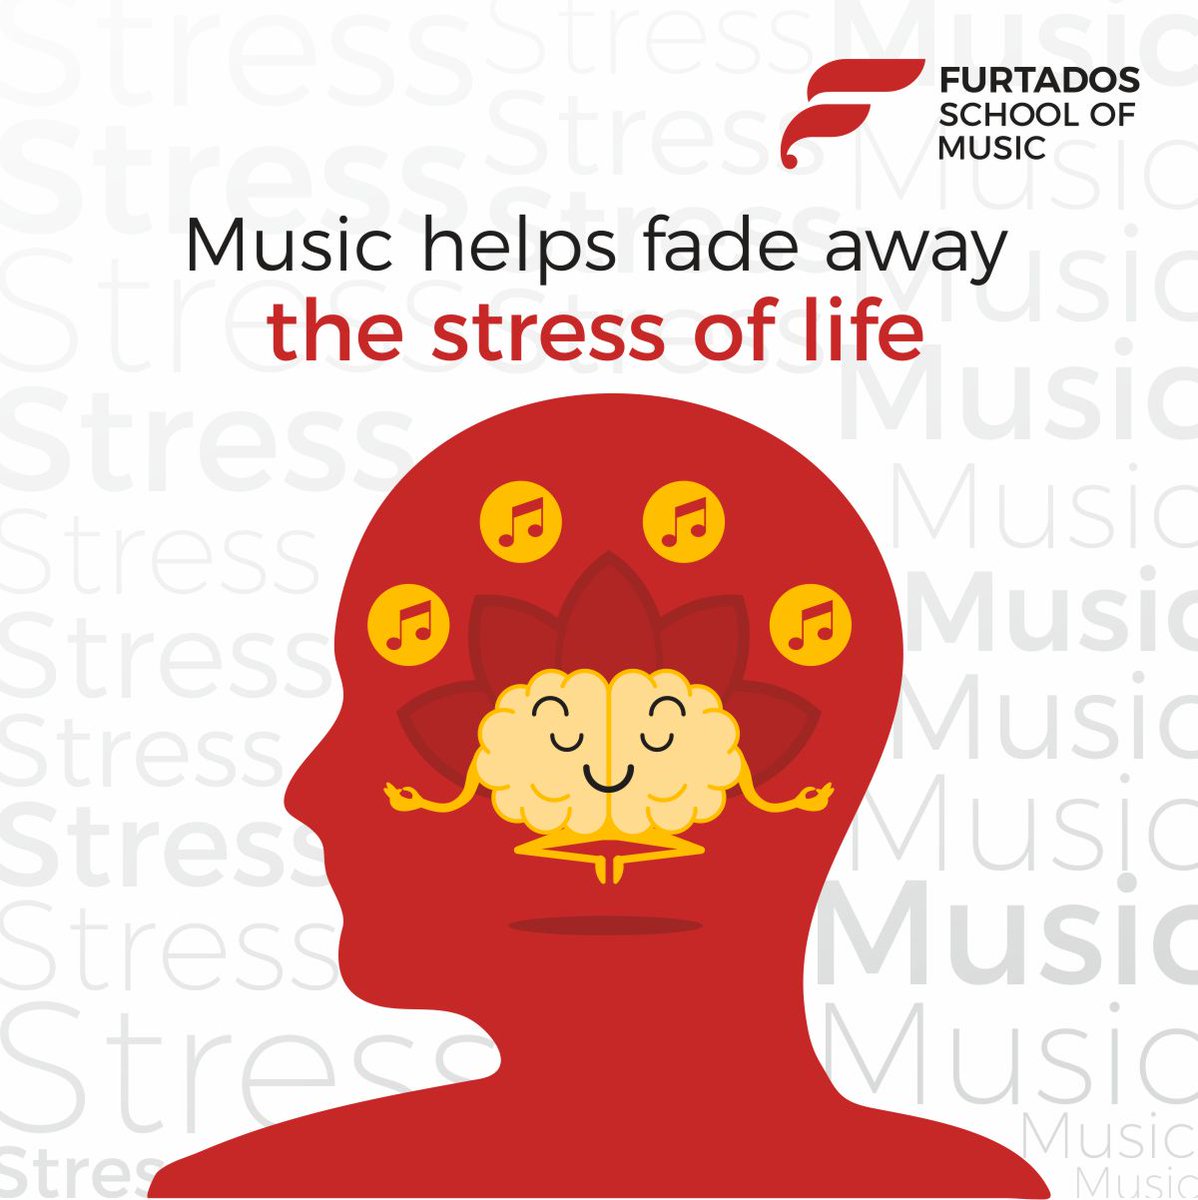 Music has a profound effect on the emotions and the body. Faster music makes one  concentrate better. A slower tempo can quiet one's mind and relax muscles, releasing the stress of the day. 

#FSM #Stress #Anxiety #MusicBenefits #Musicandstress #MusicTherapy #MusicPsychology